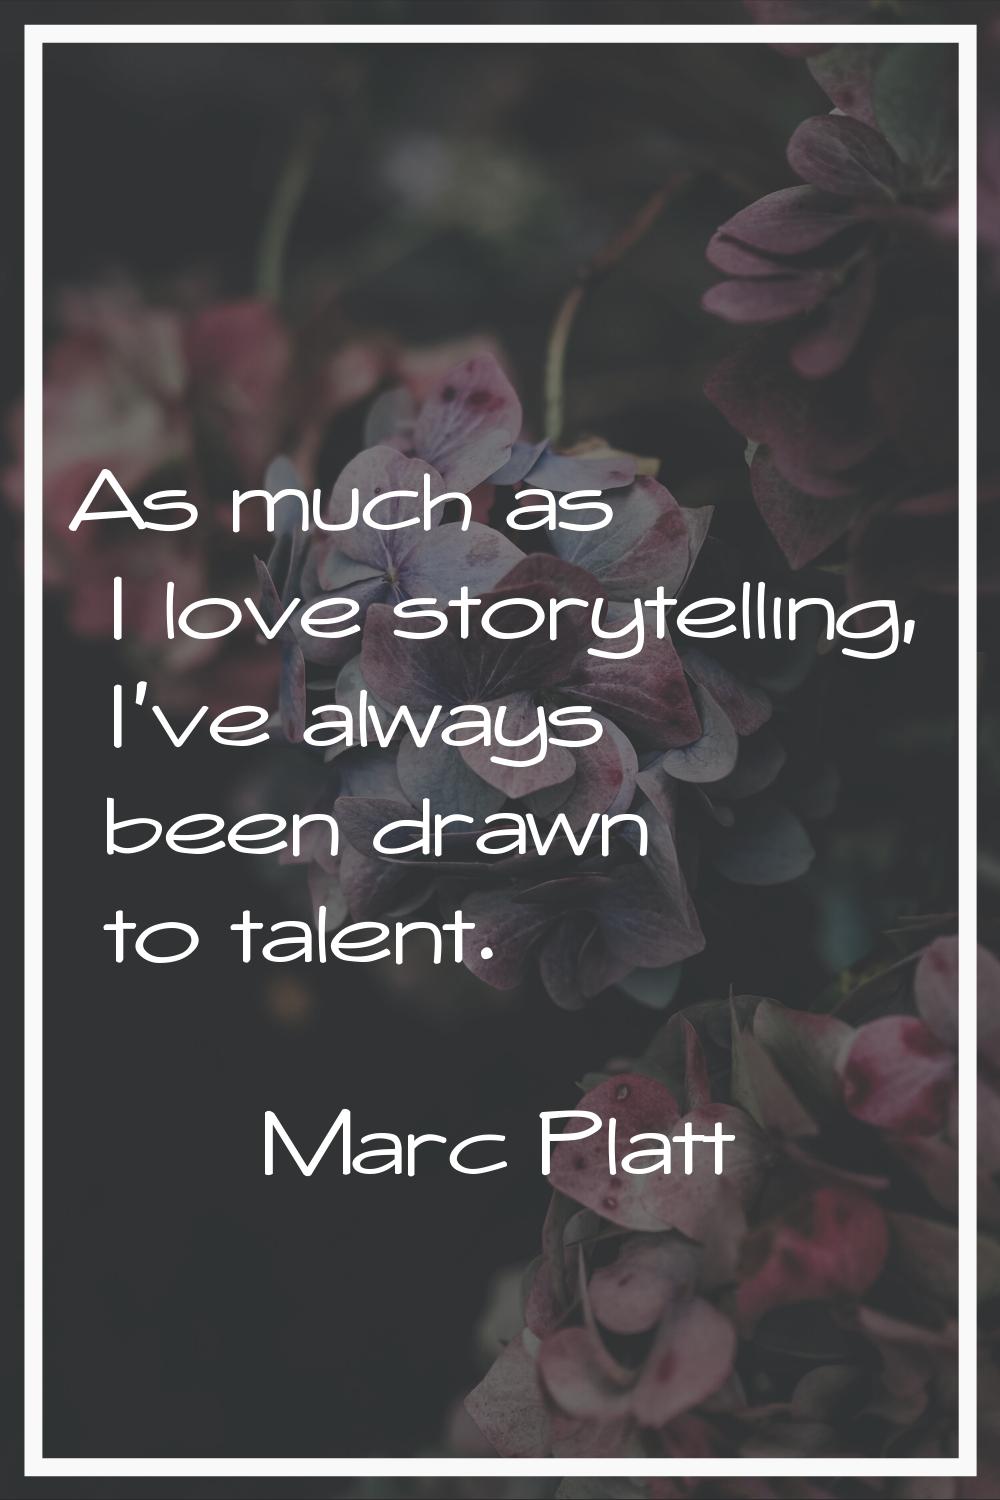 As much as I love storytelling, I've always been drawn to talent.